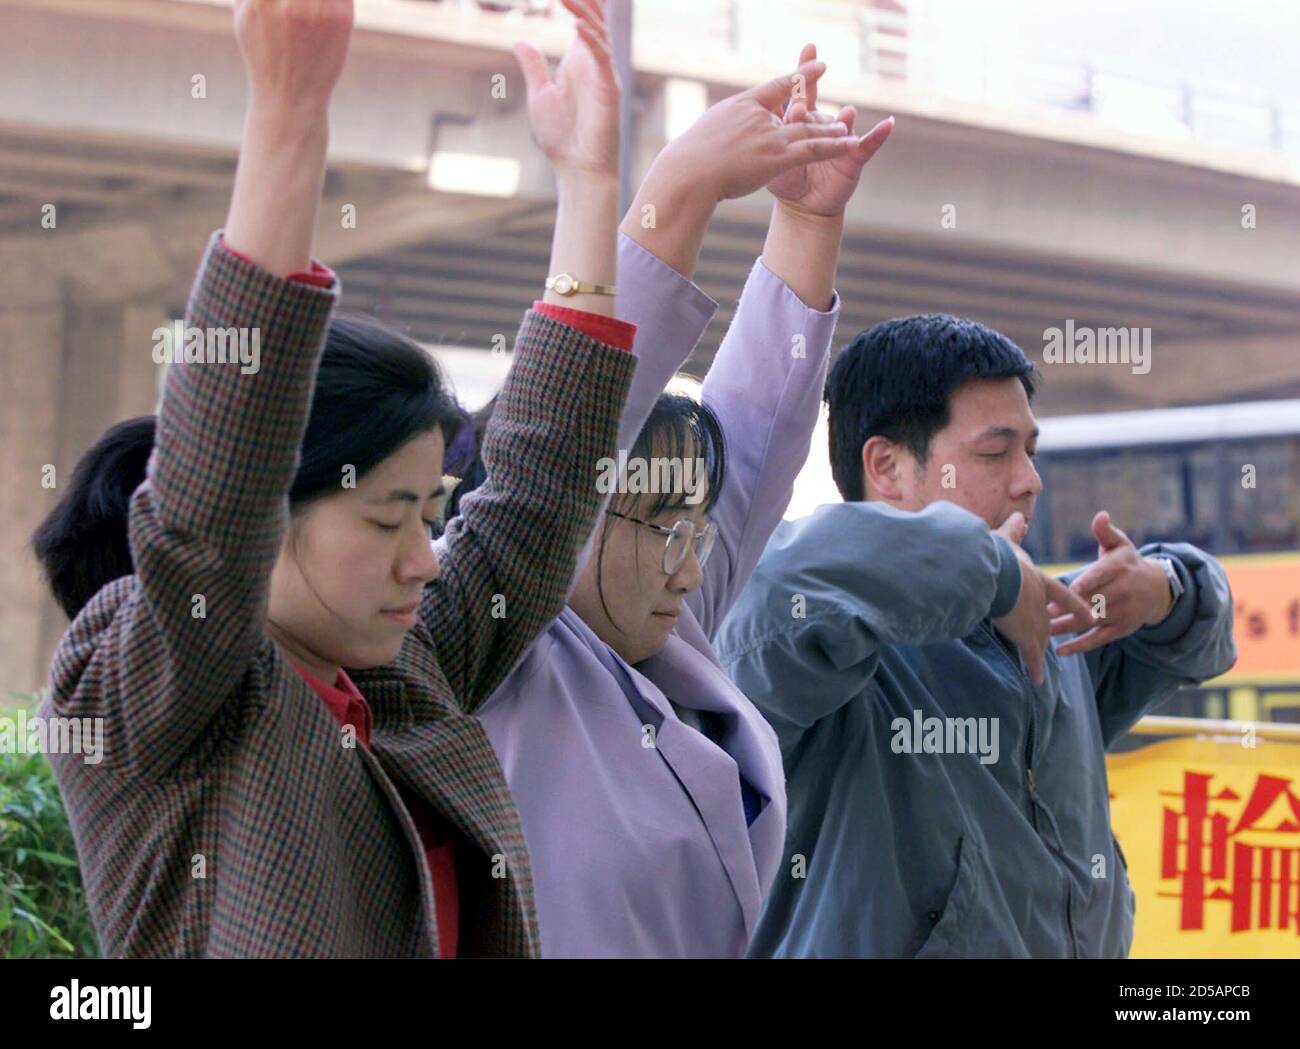 Three followers of China's banned Falun Gong spiritual movement (from L to R) Zhao Chen, Feng Lili and Huang Yun practice qigong during a protest in Hong Kong December 28. The three U.S.-passport holders, detained on December 15 for 'disrupting social order' after they travelled to Shenzhen in southern China, were released on Monday. A Chinese court earlier sentenced four leaders of the movement to up to 18 years in prison on charges ranging form stealing state secrets to causing deaths.  BY/TAN Stock Photo